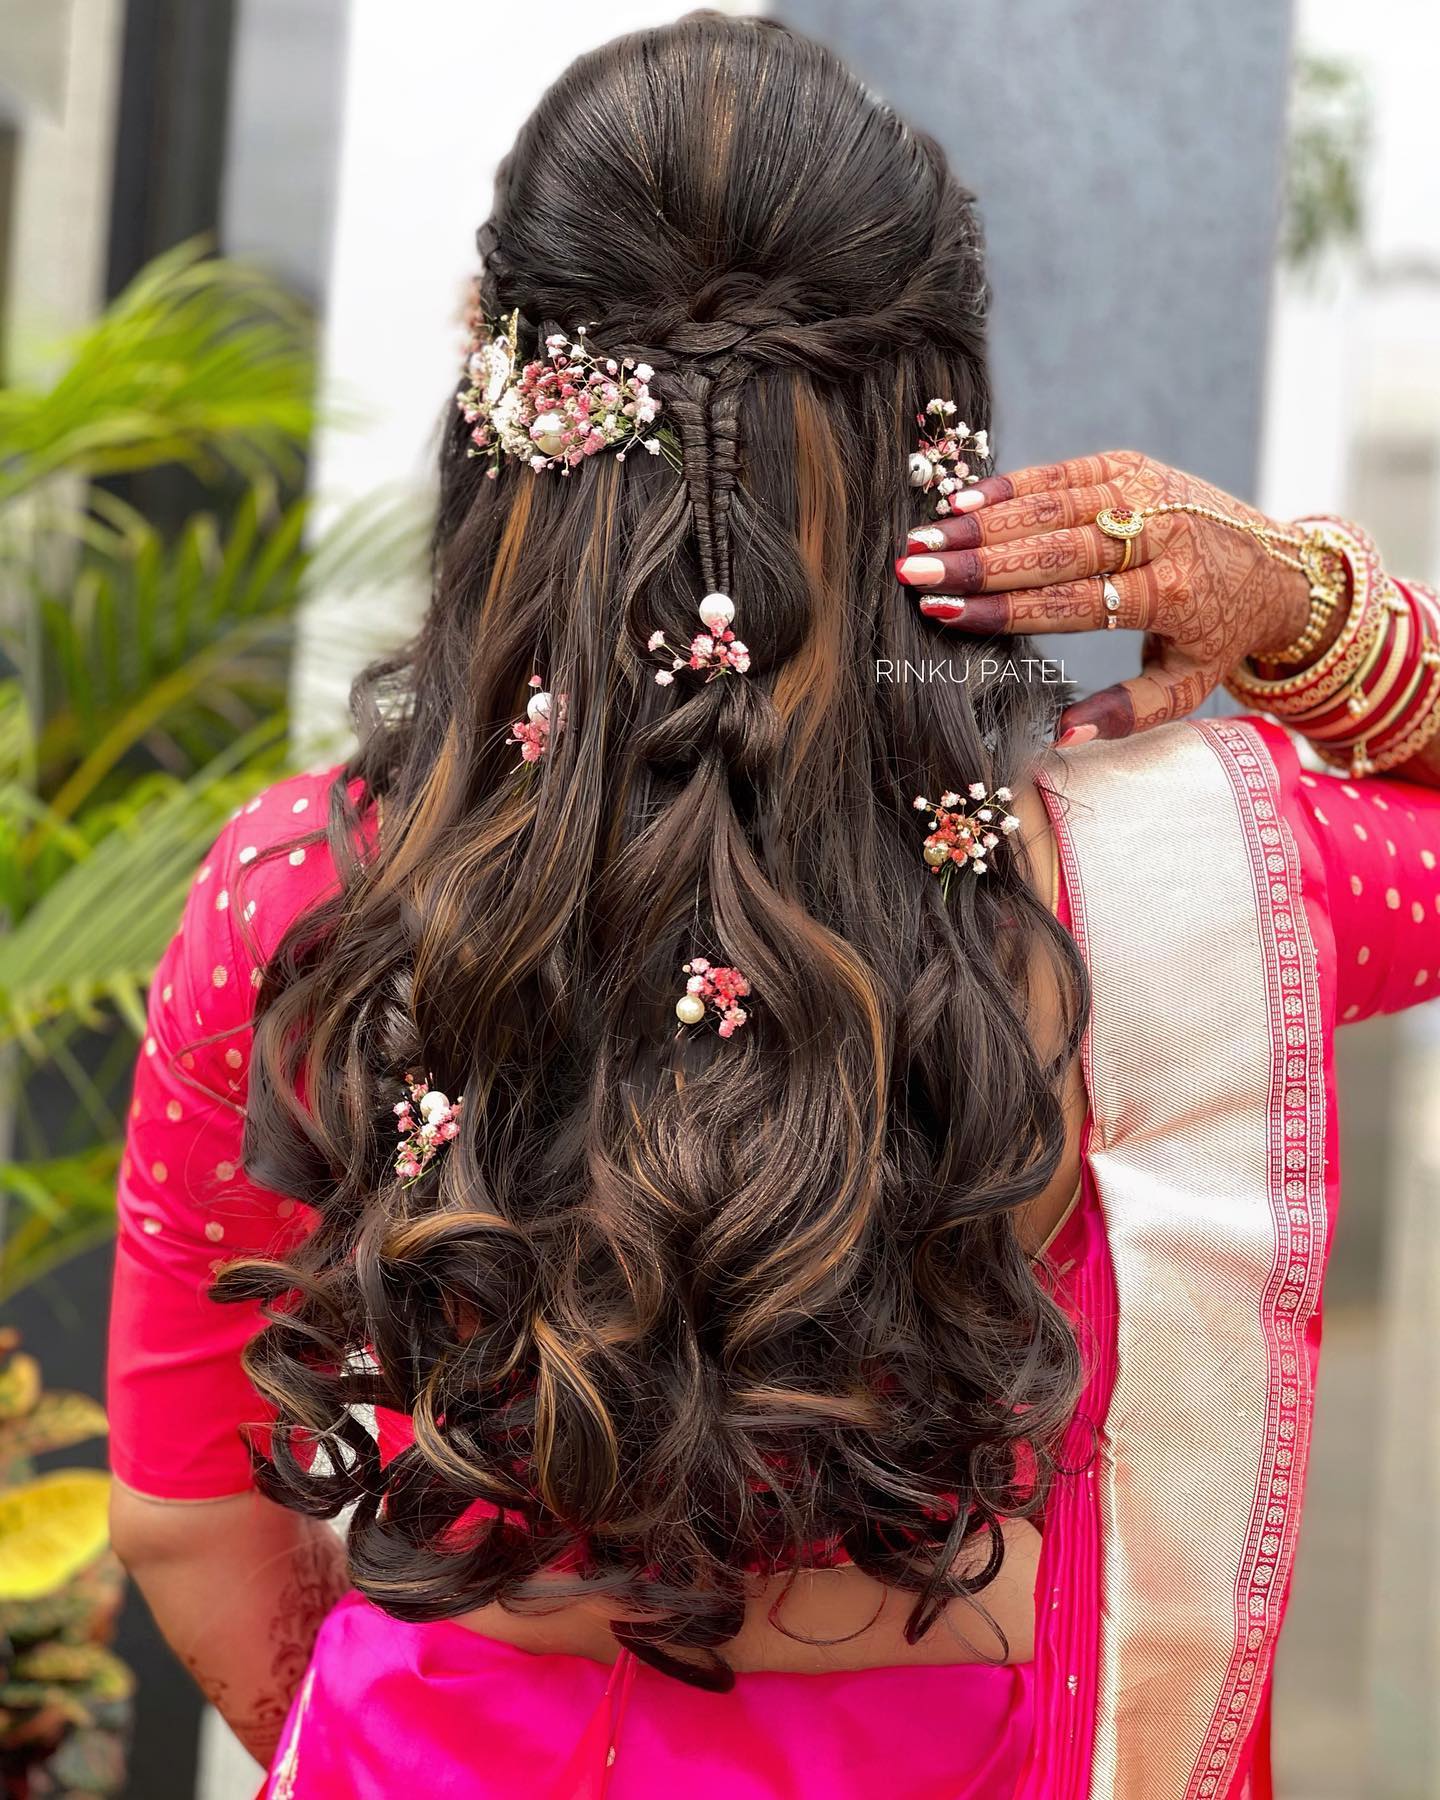 Indian wedding hairstyles for Indian Brides- Up Dos, Braids, loose curls |  Engagement hairstyles, Indian wedding hairstyles, Indian hairstyles